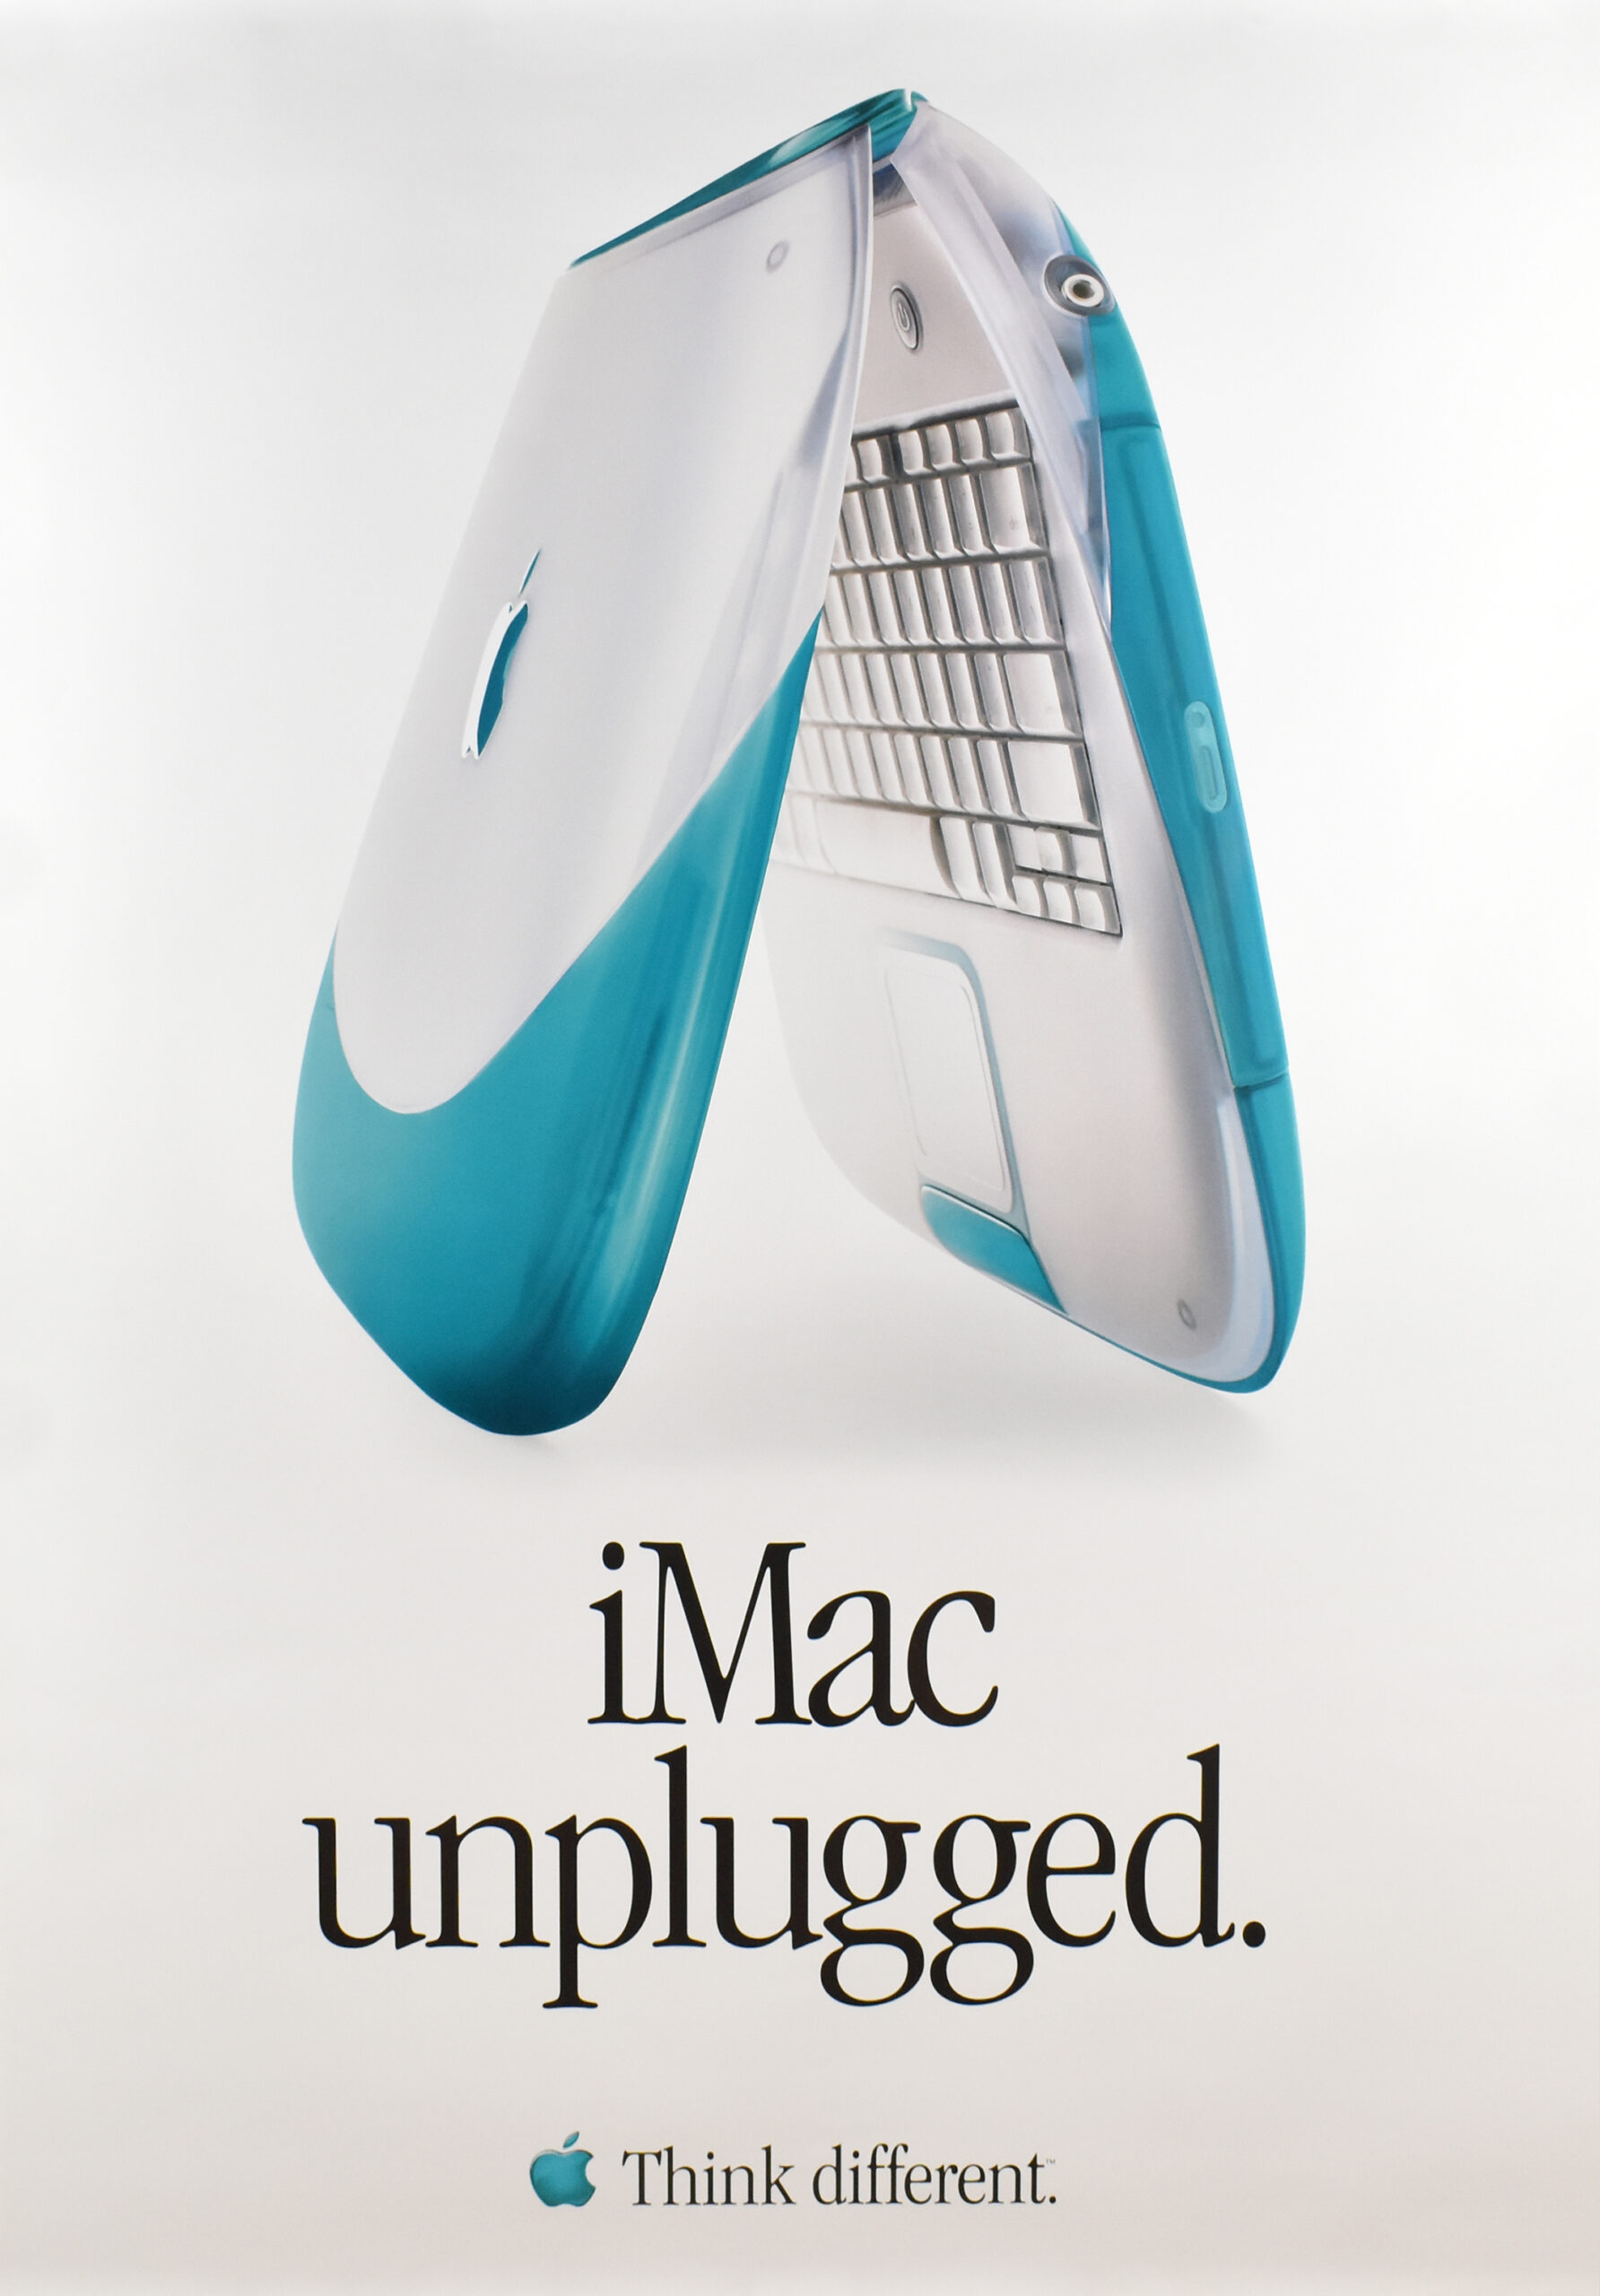 where is itunes music stored on imac